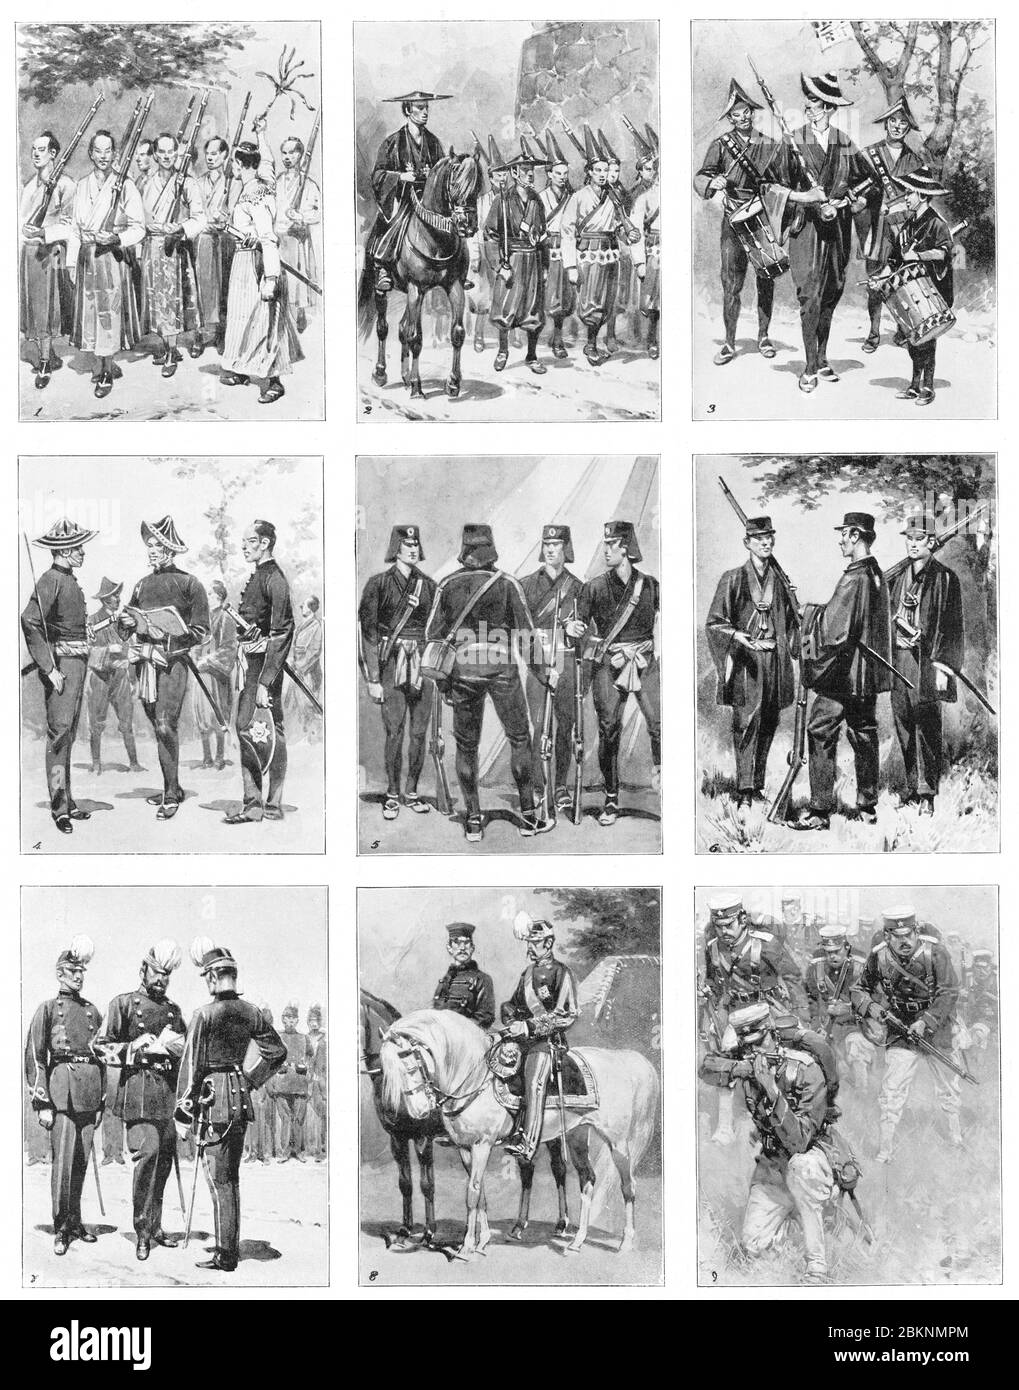 [ 1900s Japan - Japanese Military Uniforms ] —   Page from the Illustrated London News Vol CXXIV, 1904 (Meiji 37) showing Japanese military uniforms.  Original caption: “Japan’s leap from Barbarism to civilisation : A Generation of Military progress.” This edition of the Illustrated London News focused on the Russo-Japanese War (1904-1905).  20th century vintage newspaper illustration. Stock Photo